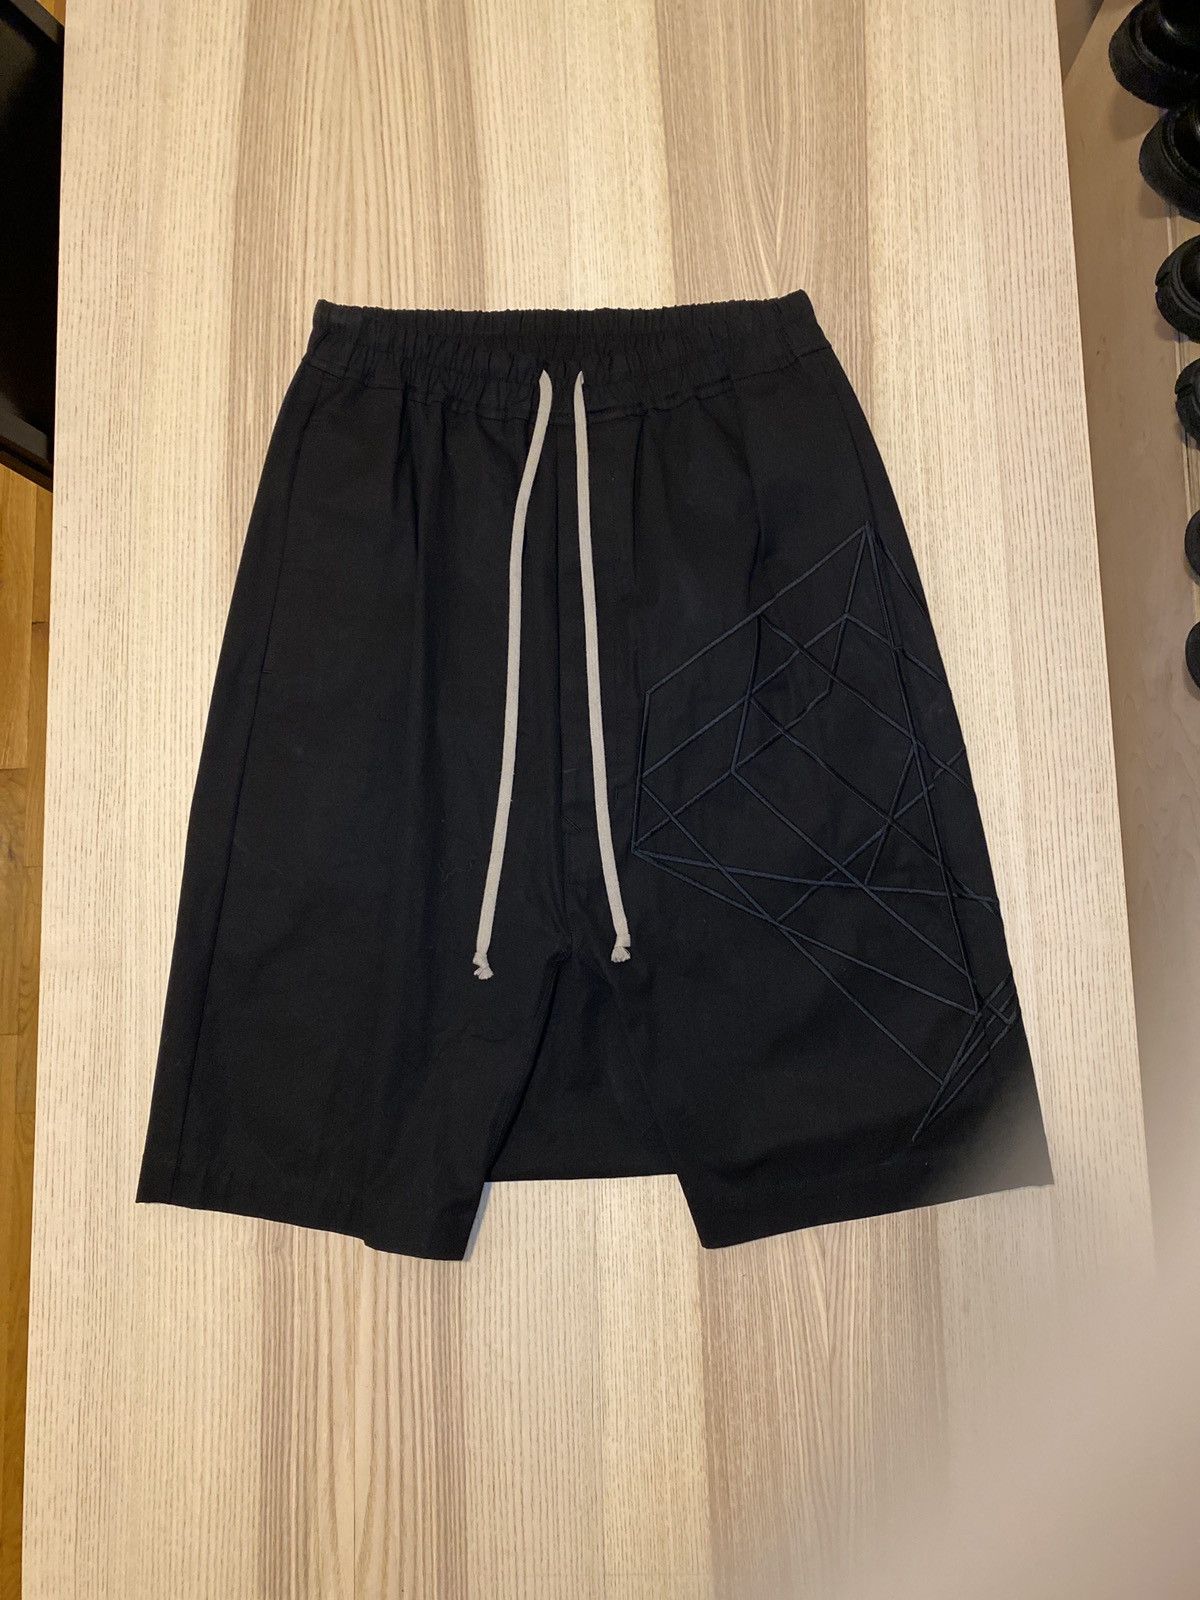 Rick Owens Rick Owens Embroidered Pod Shorts BABEL S/S 19 | Grailed